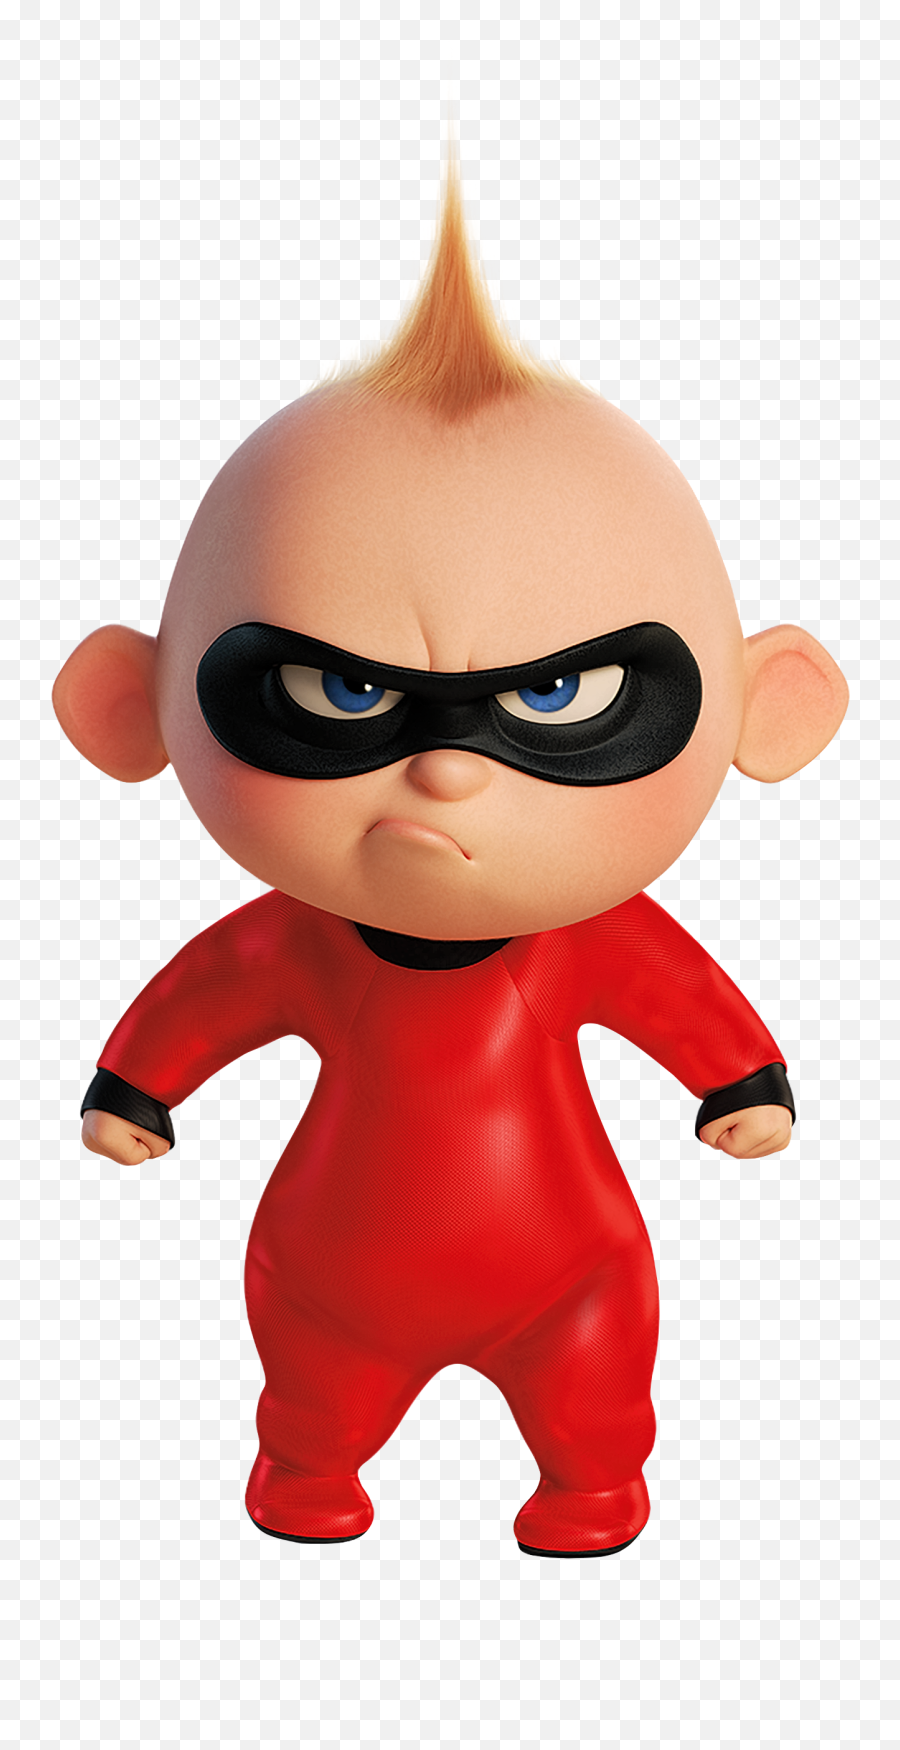 Download The Incredibles Png Image - Baby Incredibles 2 Characters,The Incredibles Png